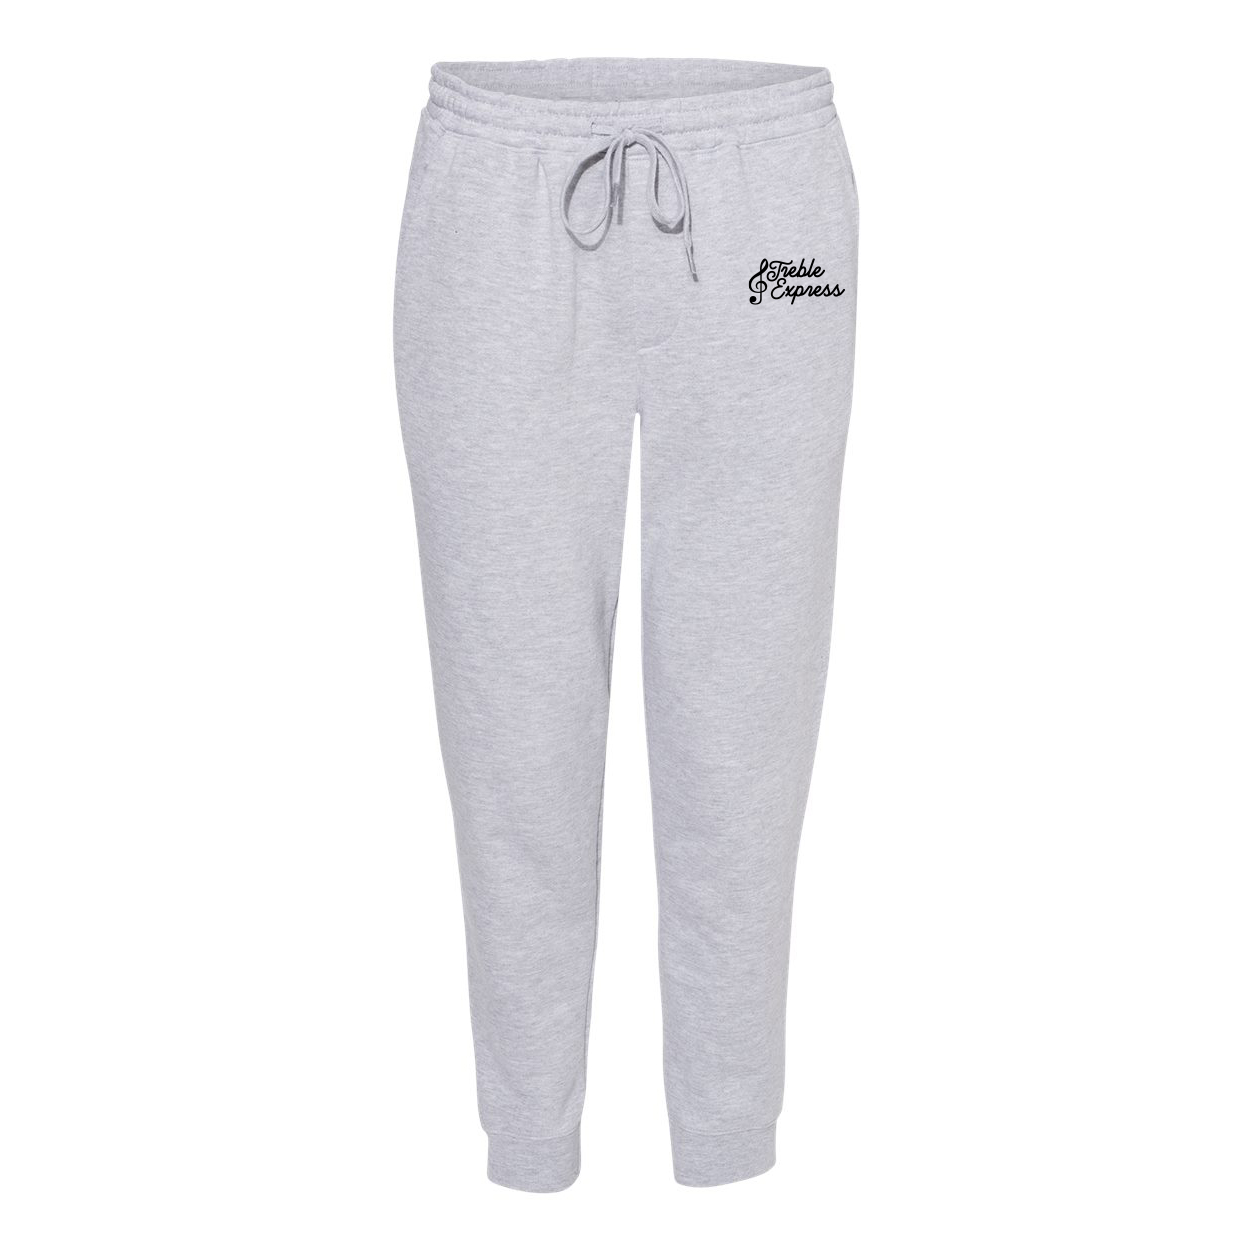 Treble Express Sweatpants – Special Tee's Screen printing